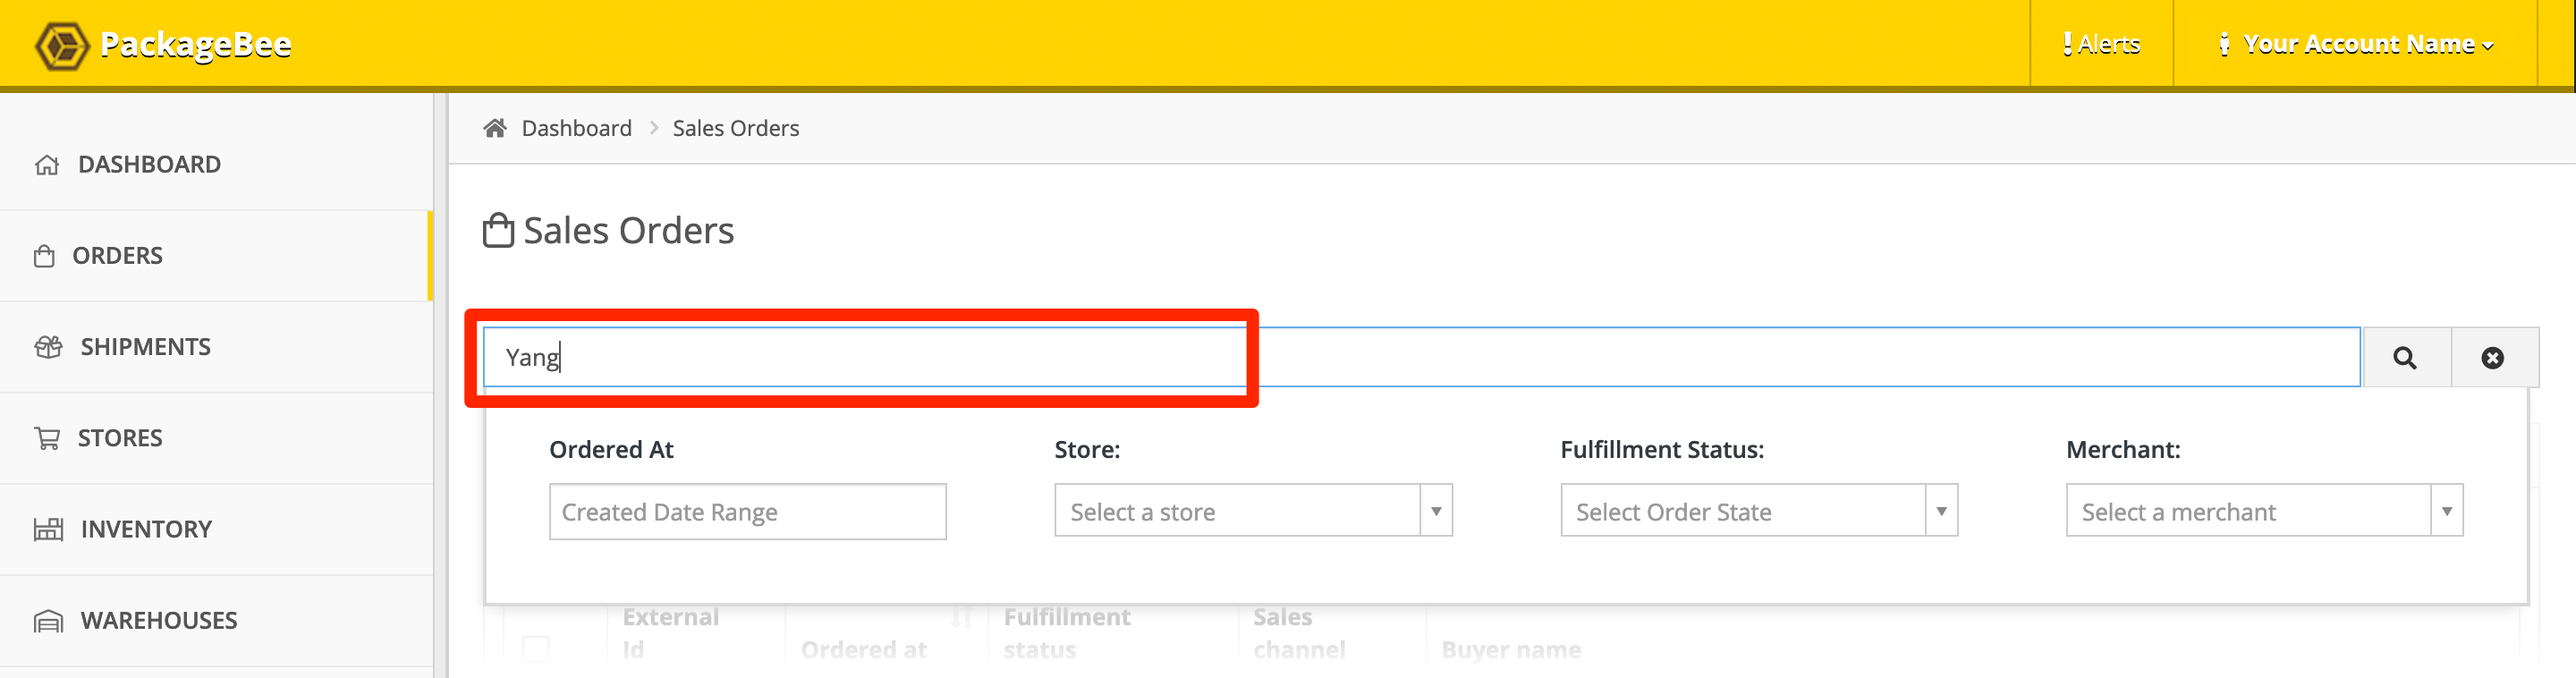 Use the Search/Filter bar to find an order.